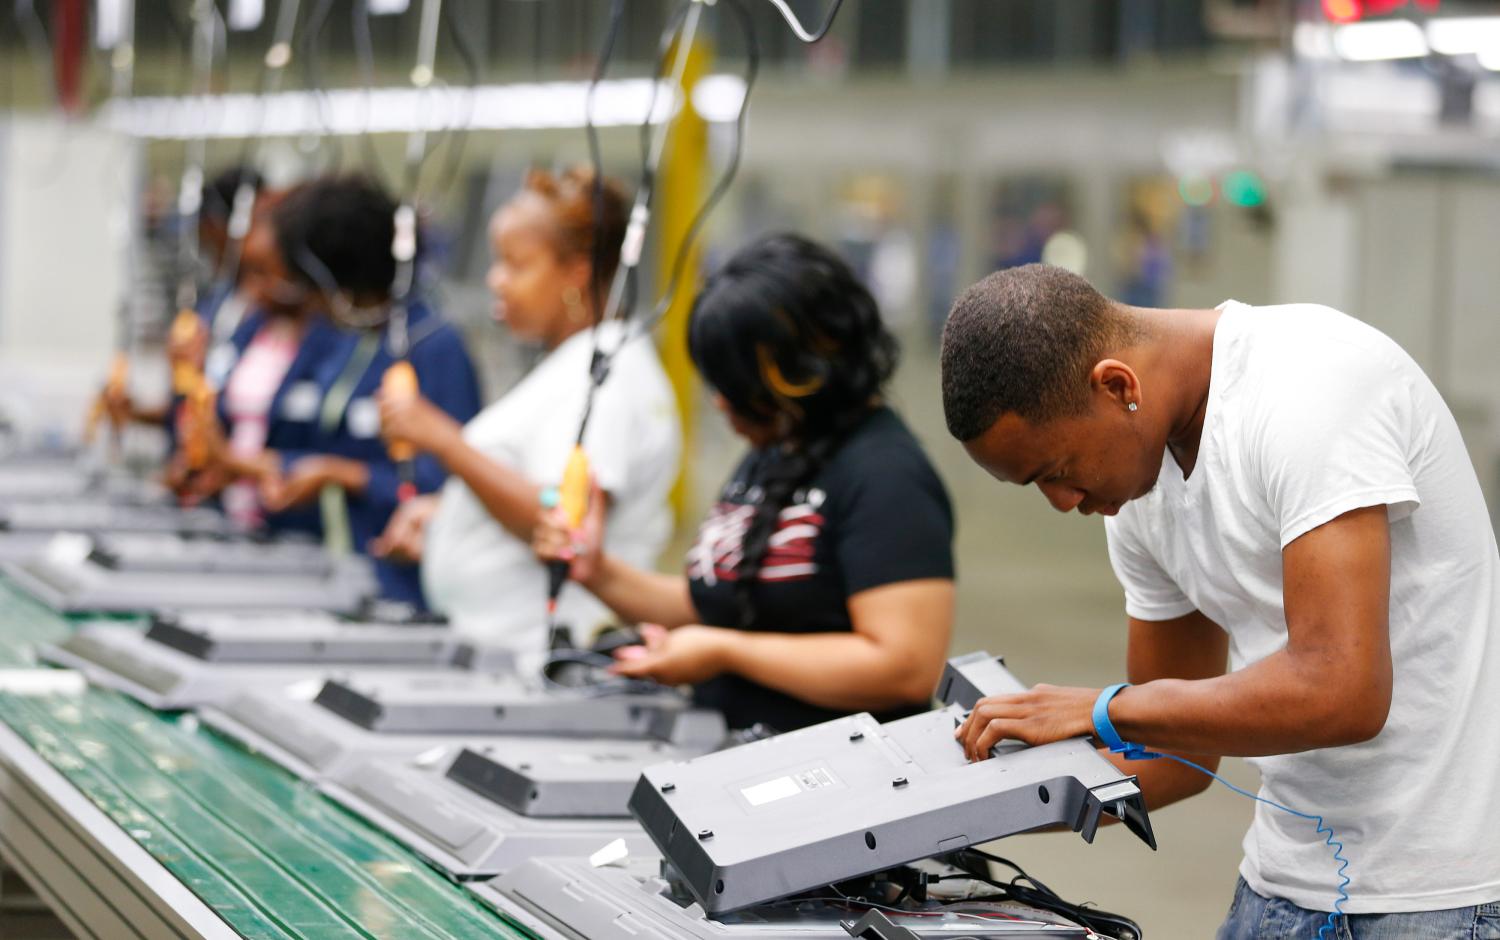 Workers on the assembly line replace the back covers of 32-inch television sets.